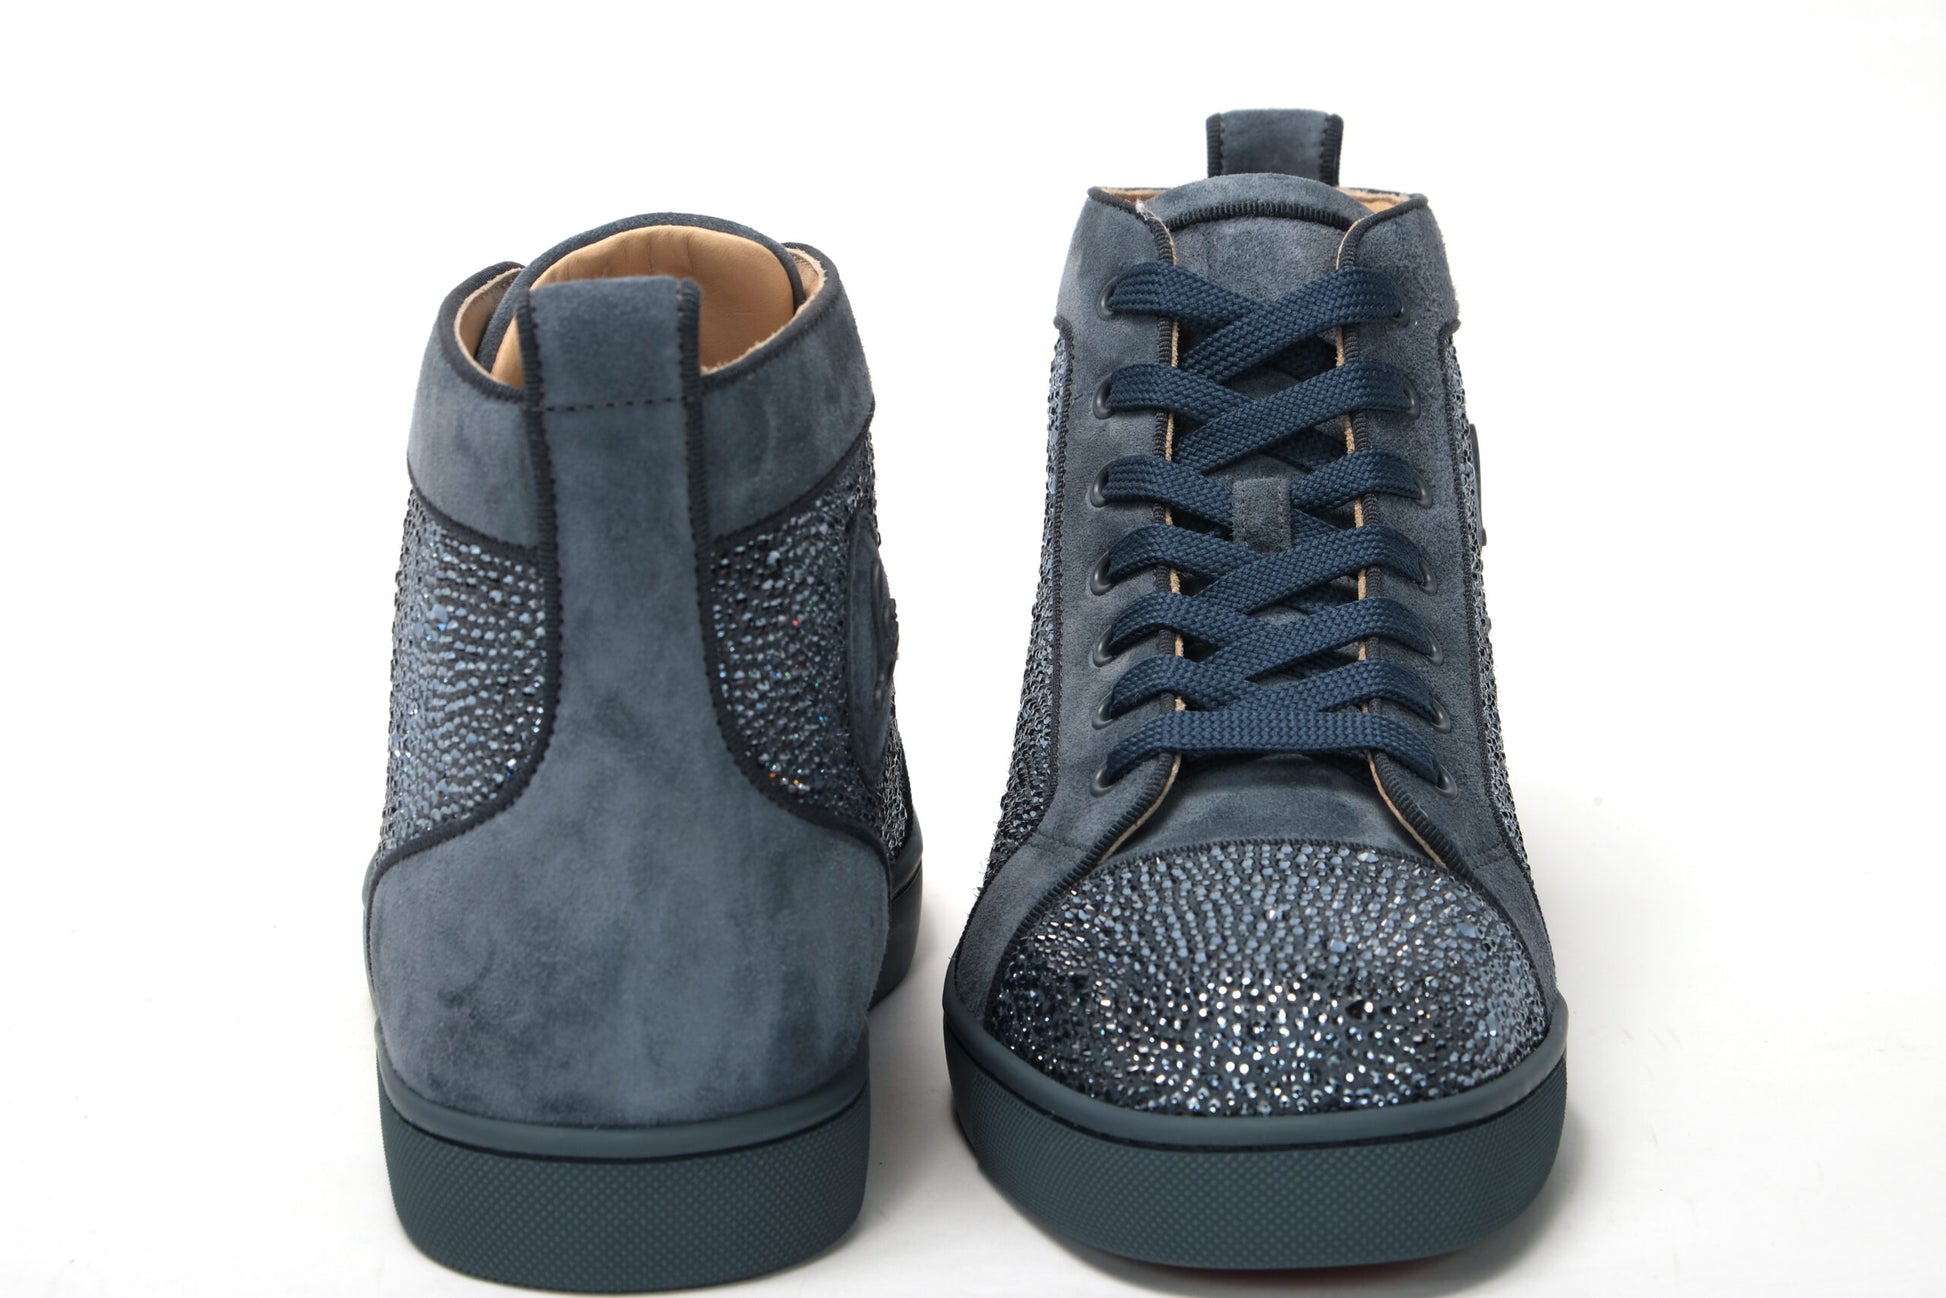 Louis Junior Spikes Suede Sneakers in Blue - Christian Louboutin